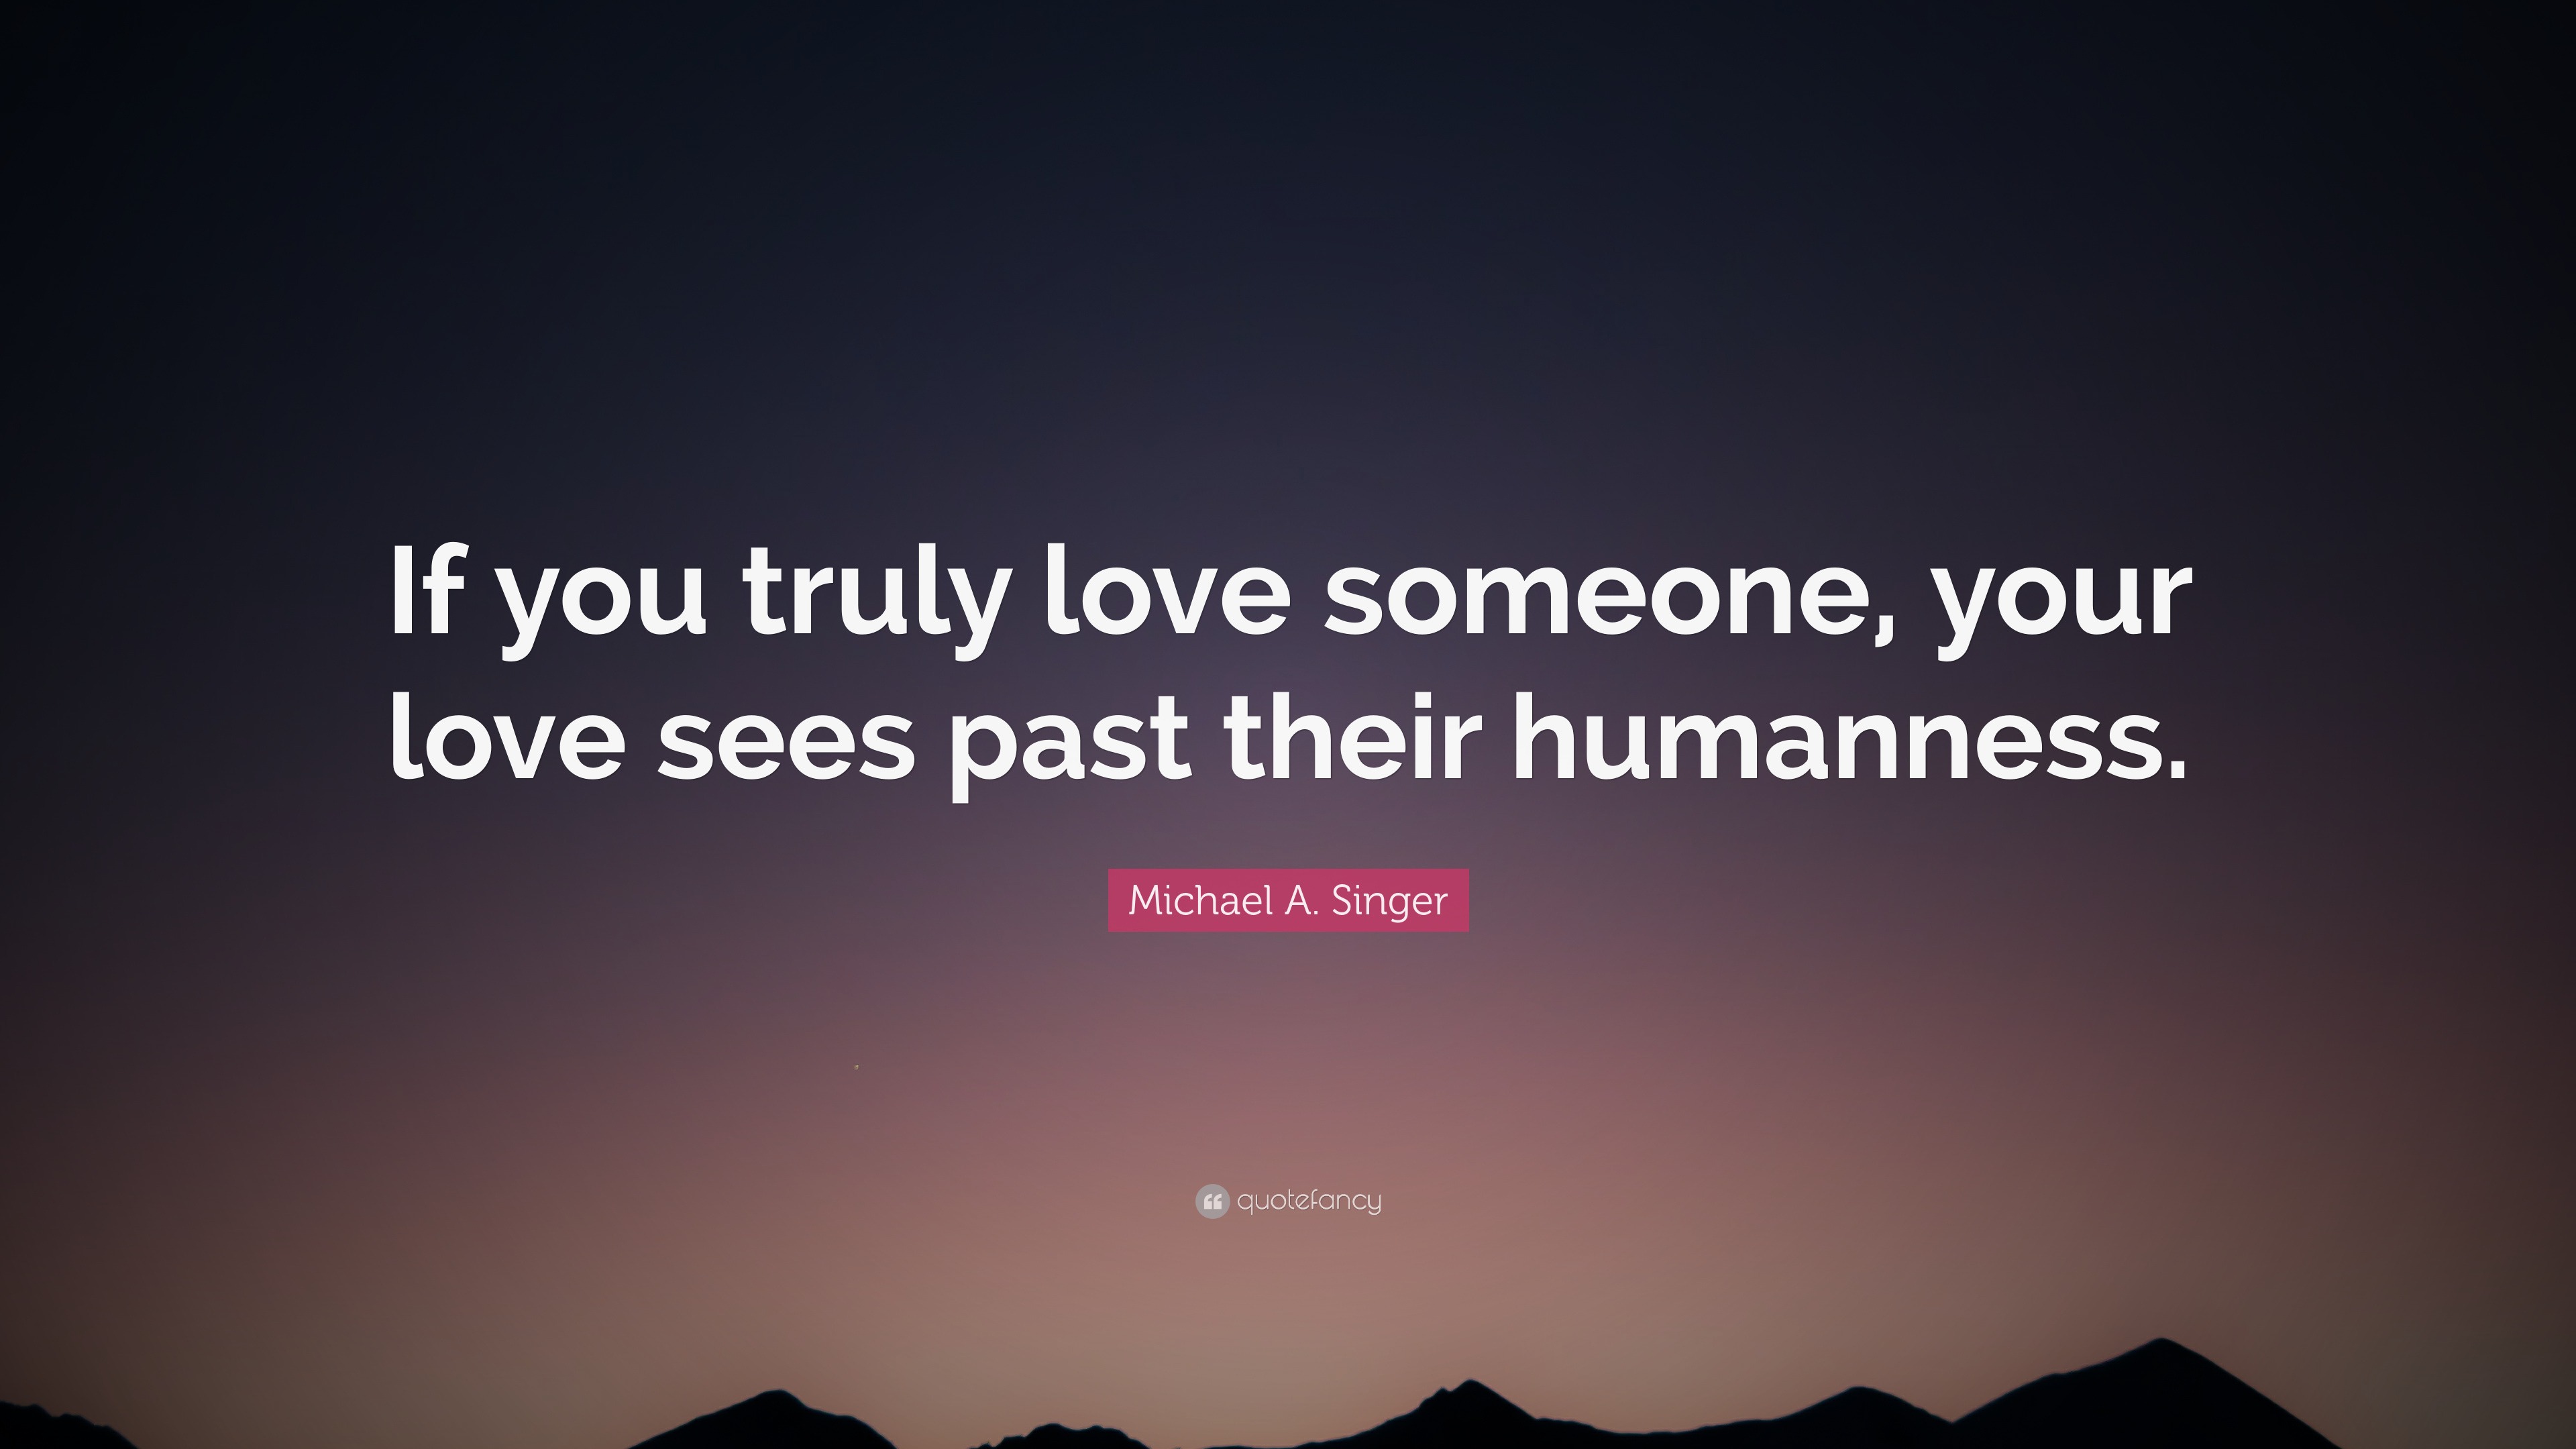 Michael A Singer Quote “If you truly love someone your love sees